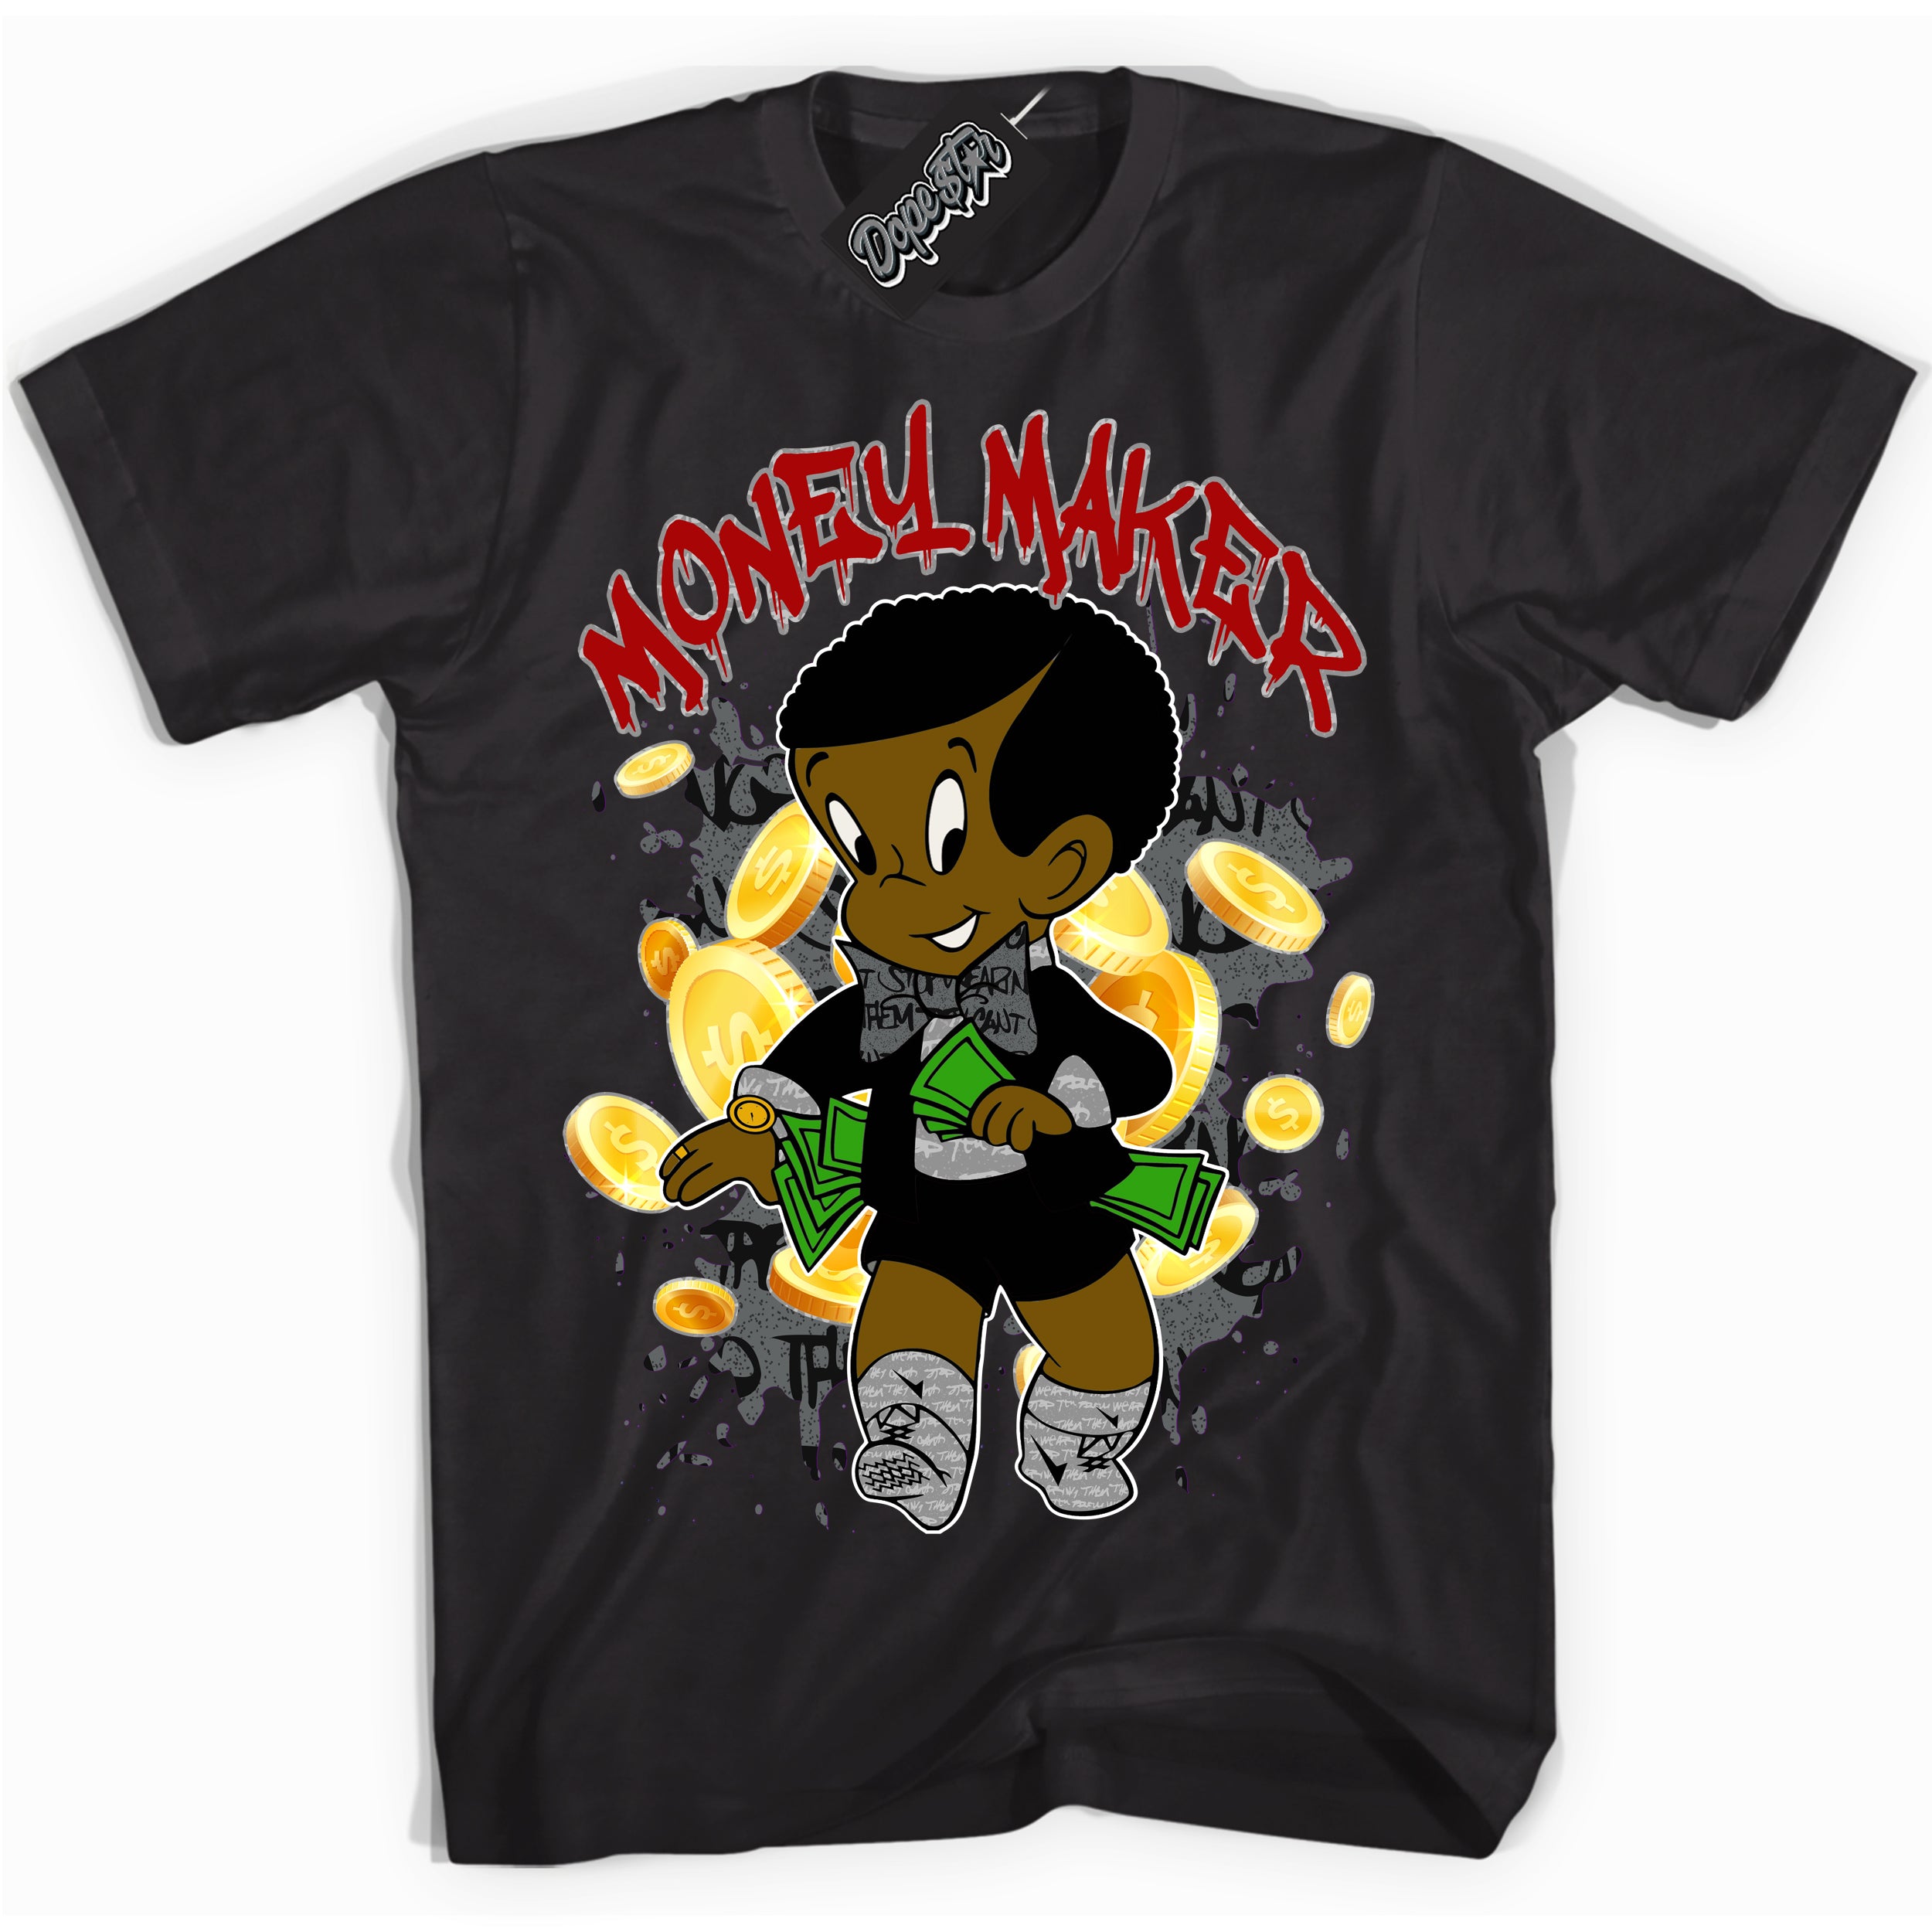 Cool Black Shirt with “ Money Maker ” design that perfectly matches Rebellionaire 1s Sneakers.